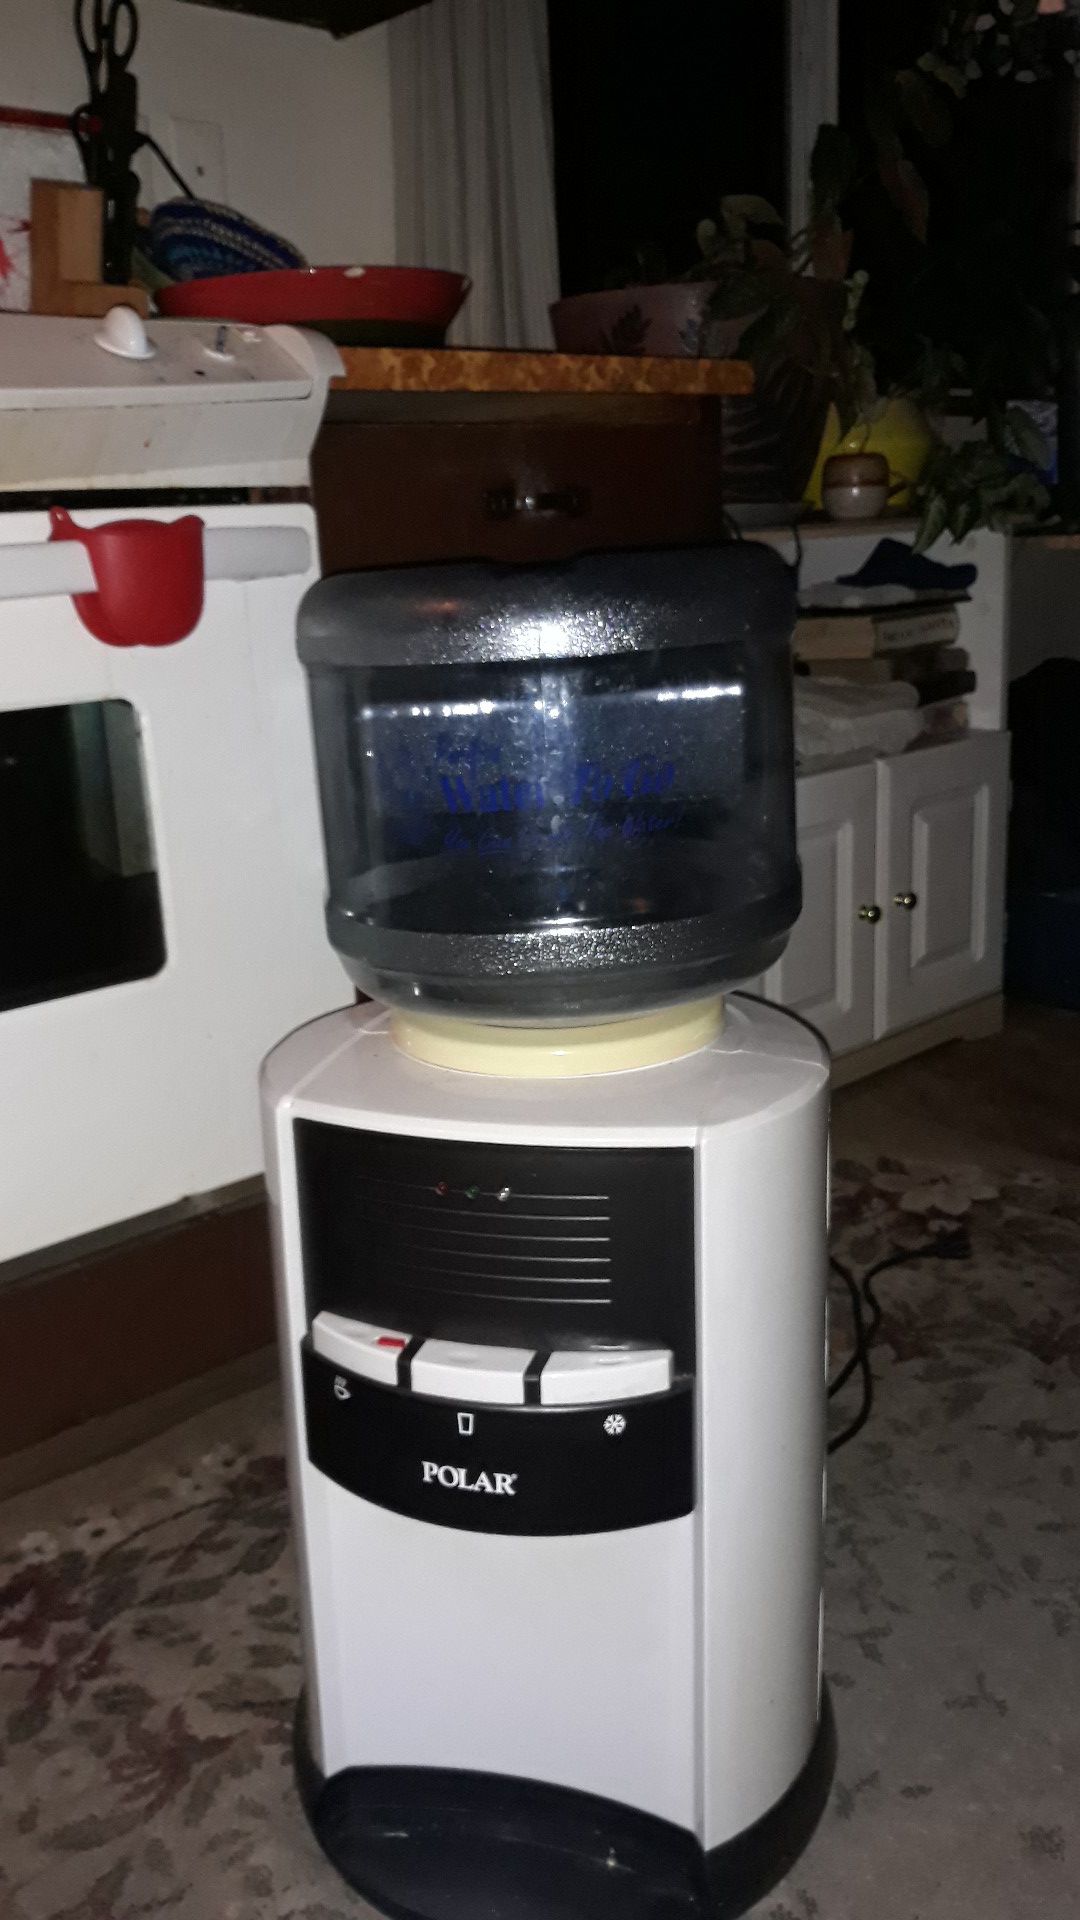 Water cooler and heater